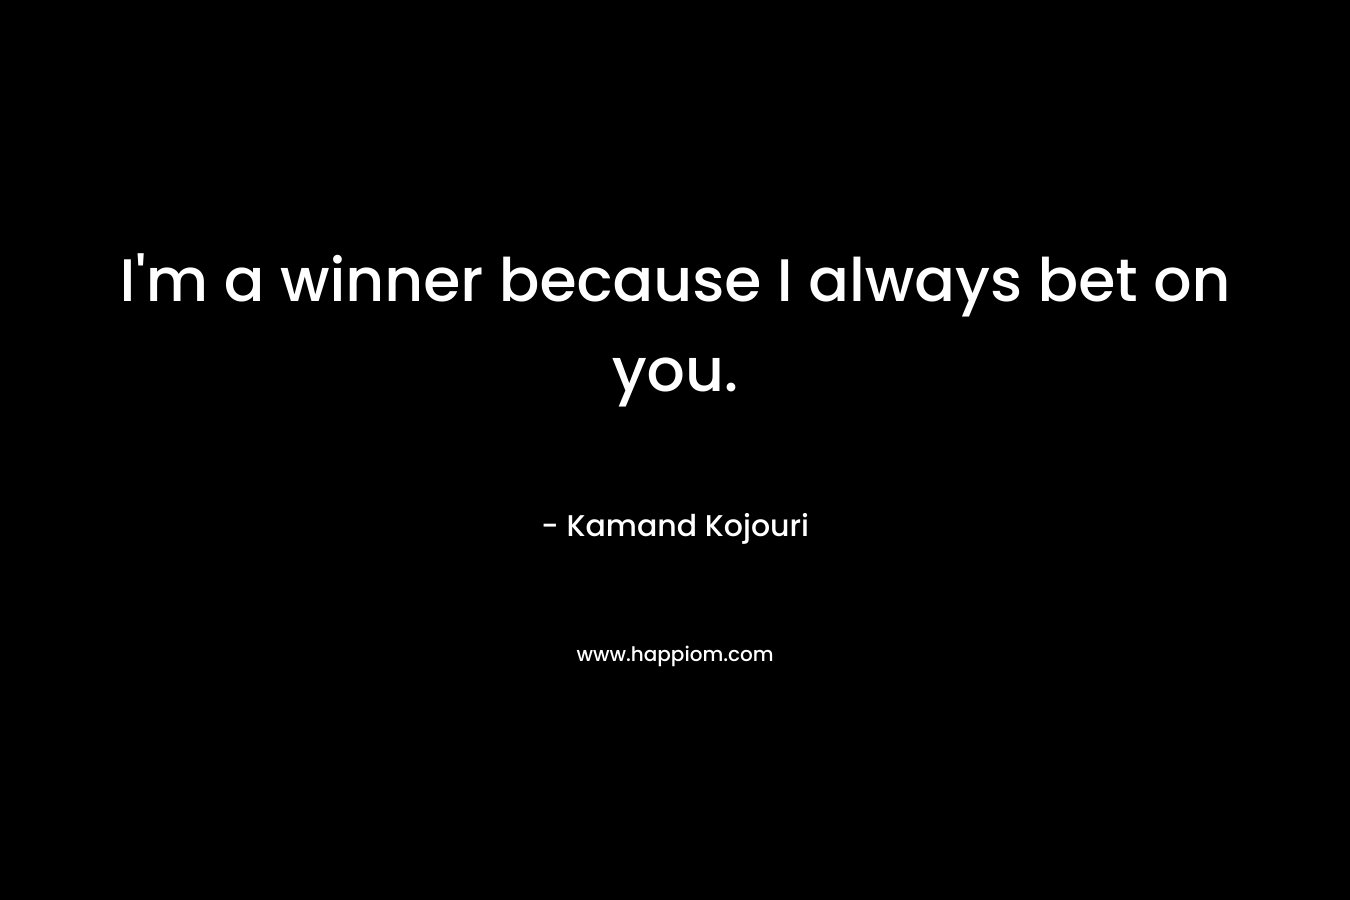 I'm a winner because I always bet on you.